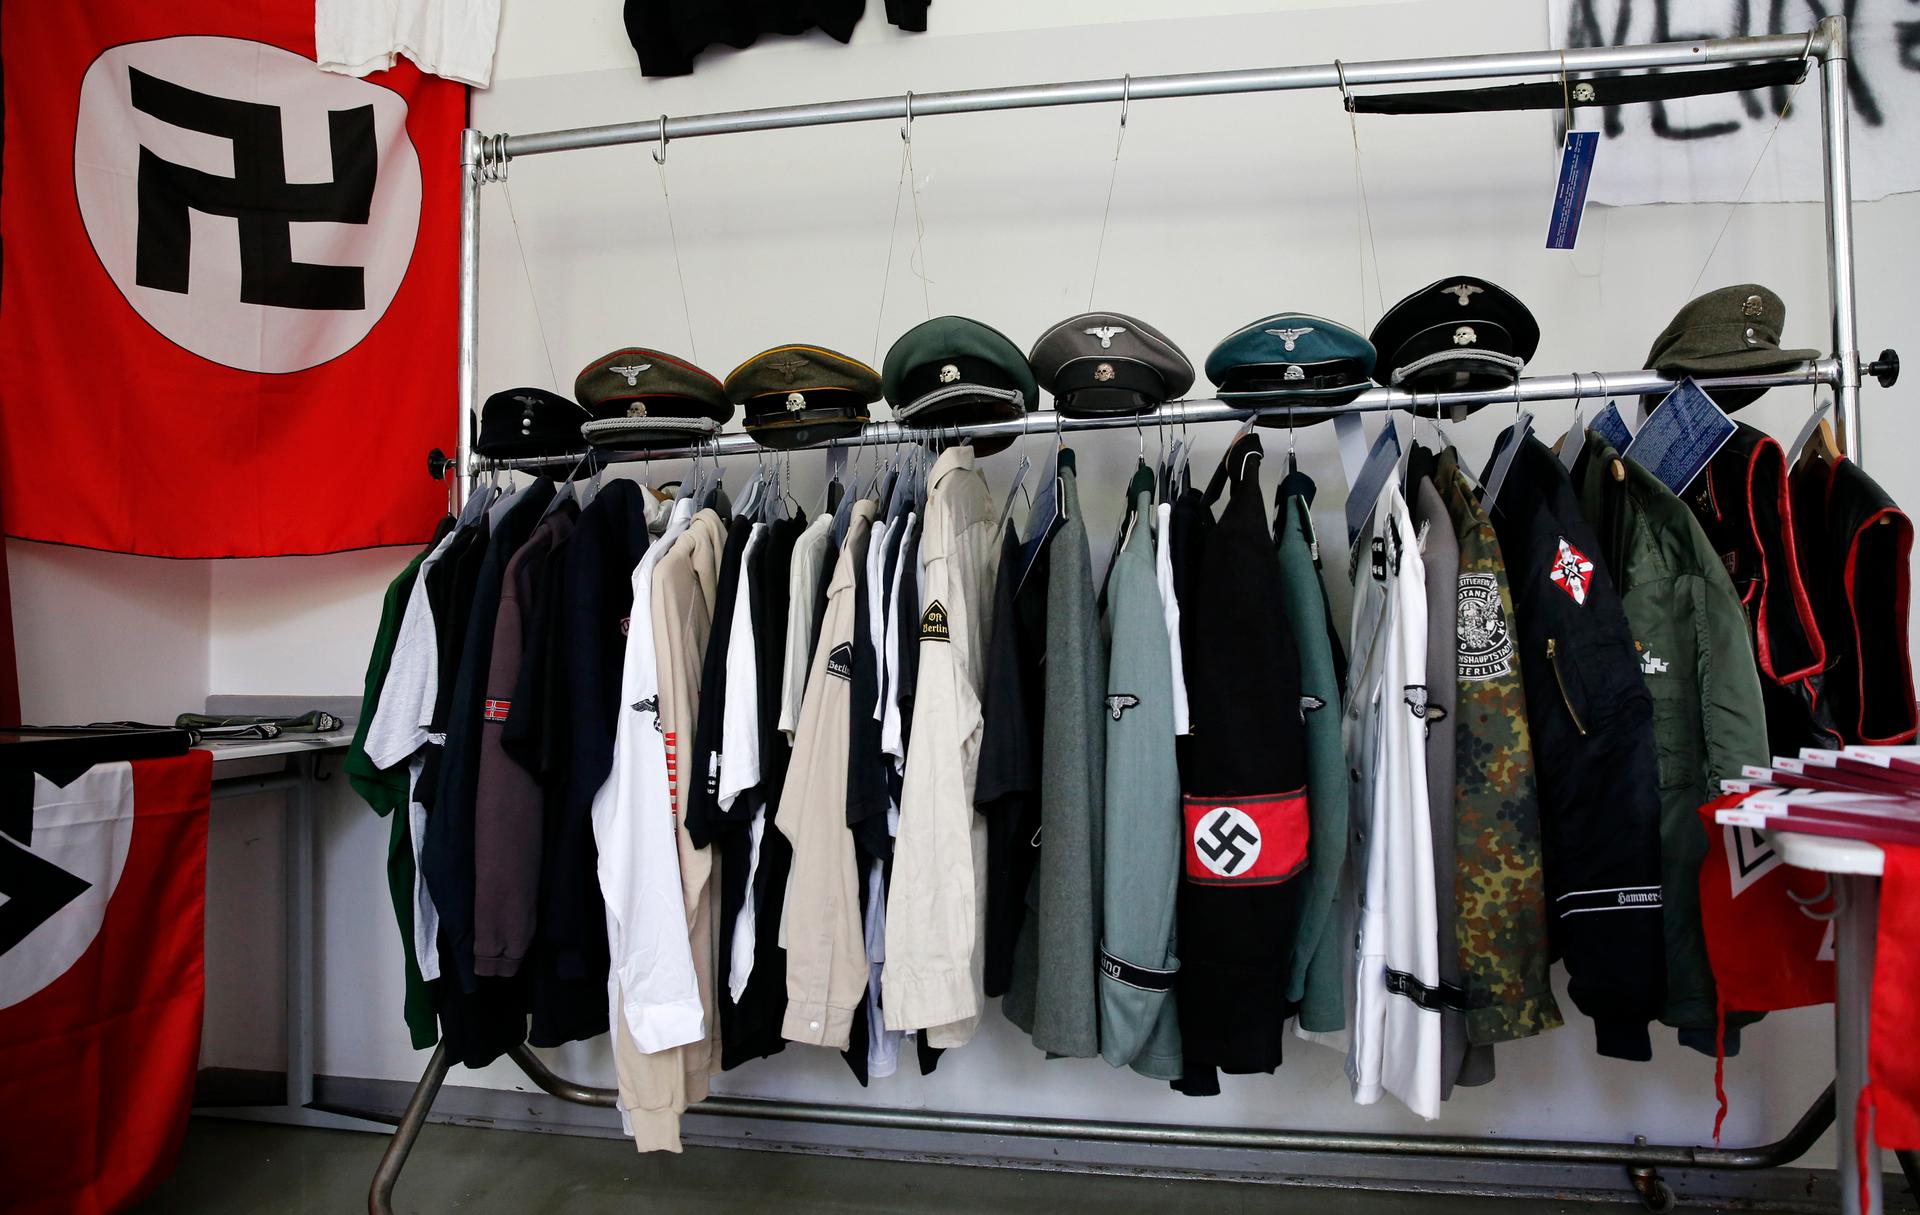 Nazi uniforms and a Swastika flag that were confiscated by the Berlin police during raids against German neo-Nazis are presented to the public during an open day at a police barracks in Berlin, September 7, 2014. 